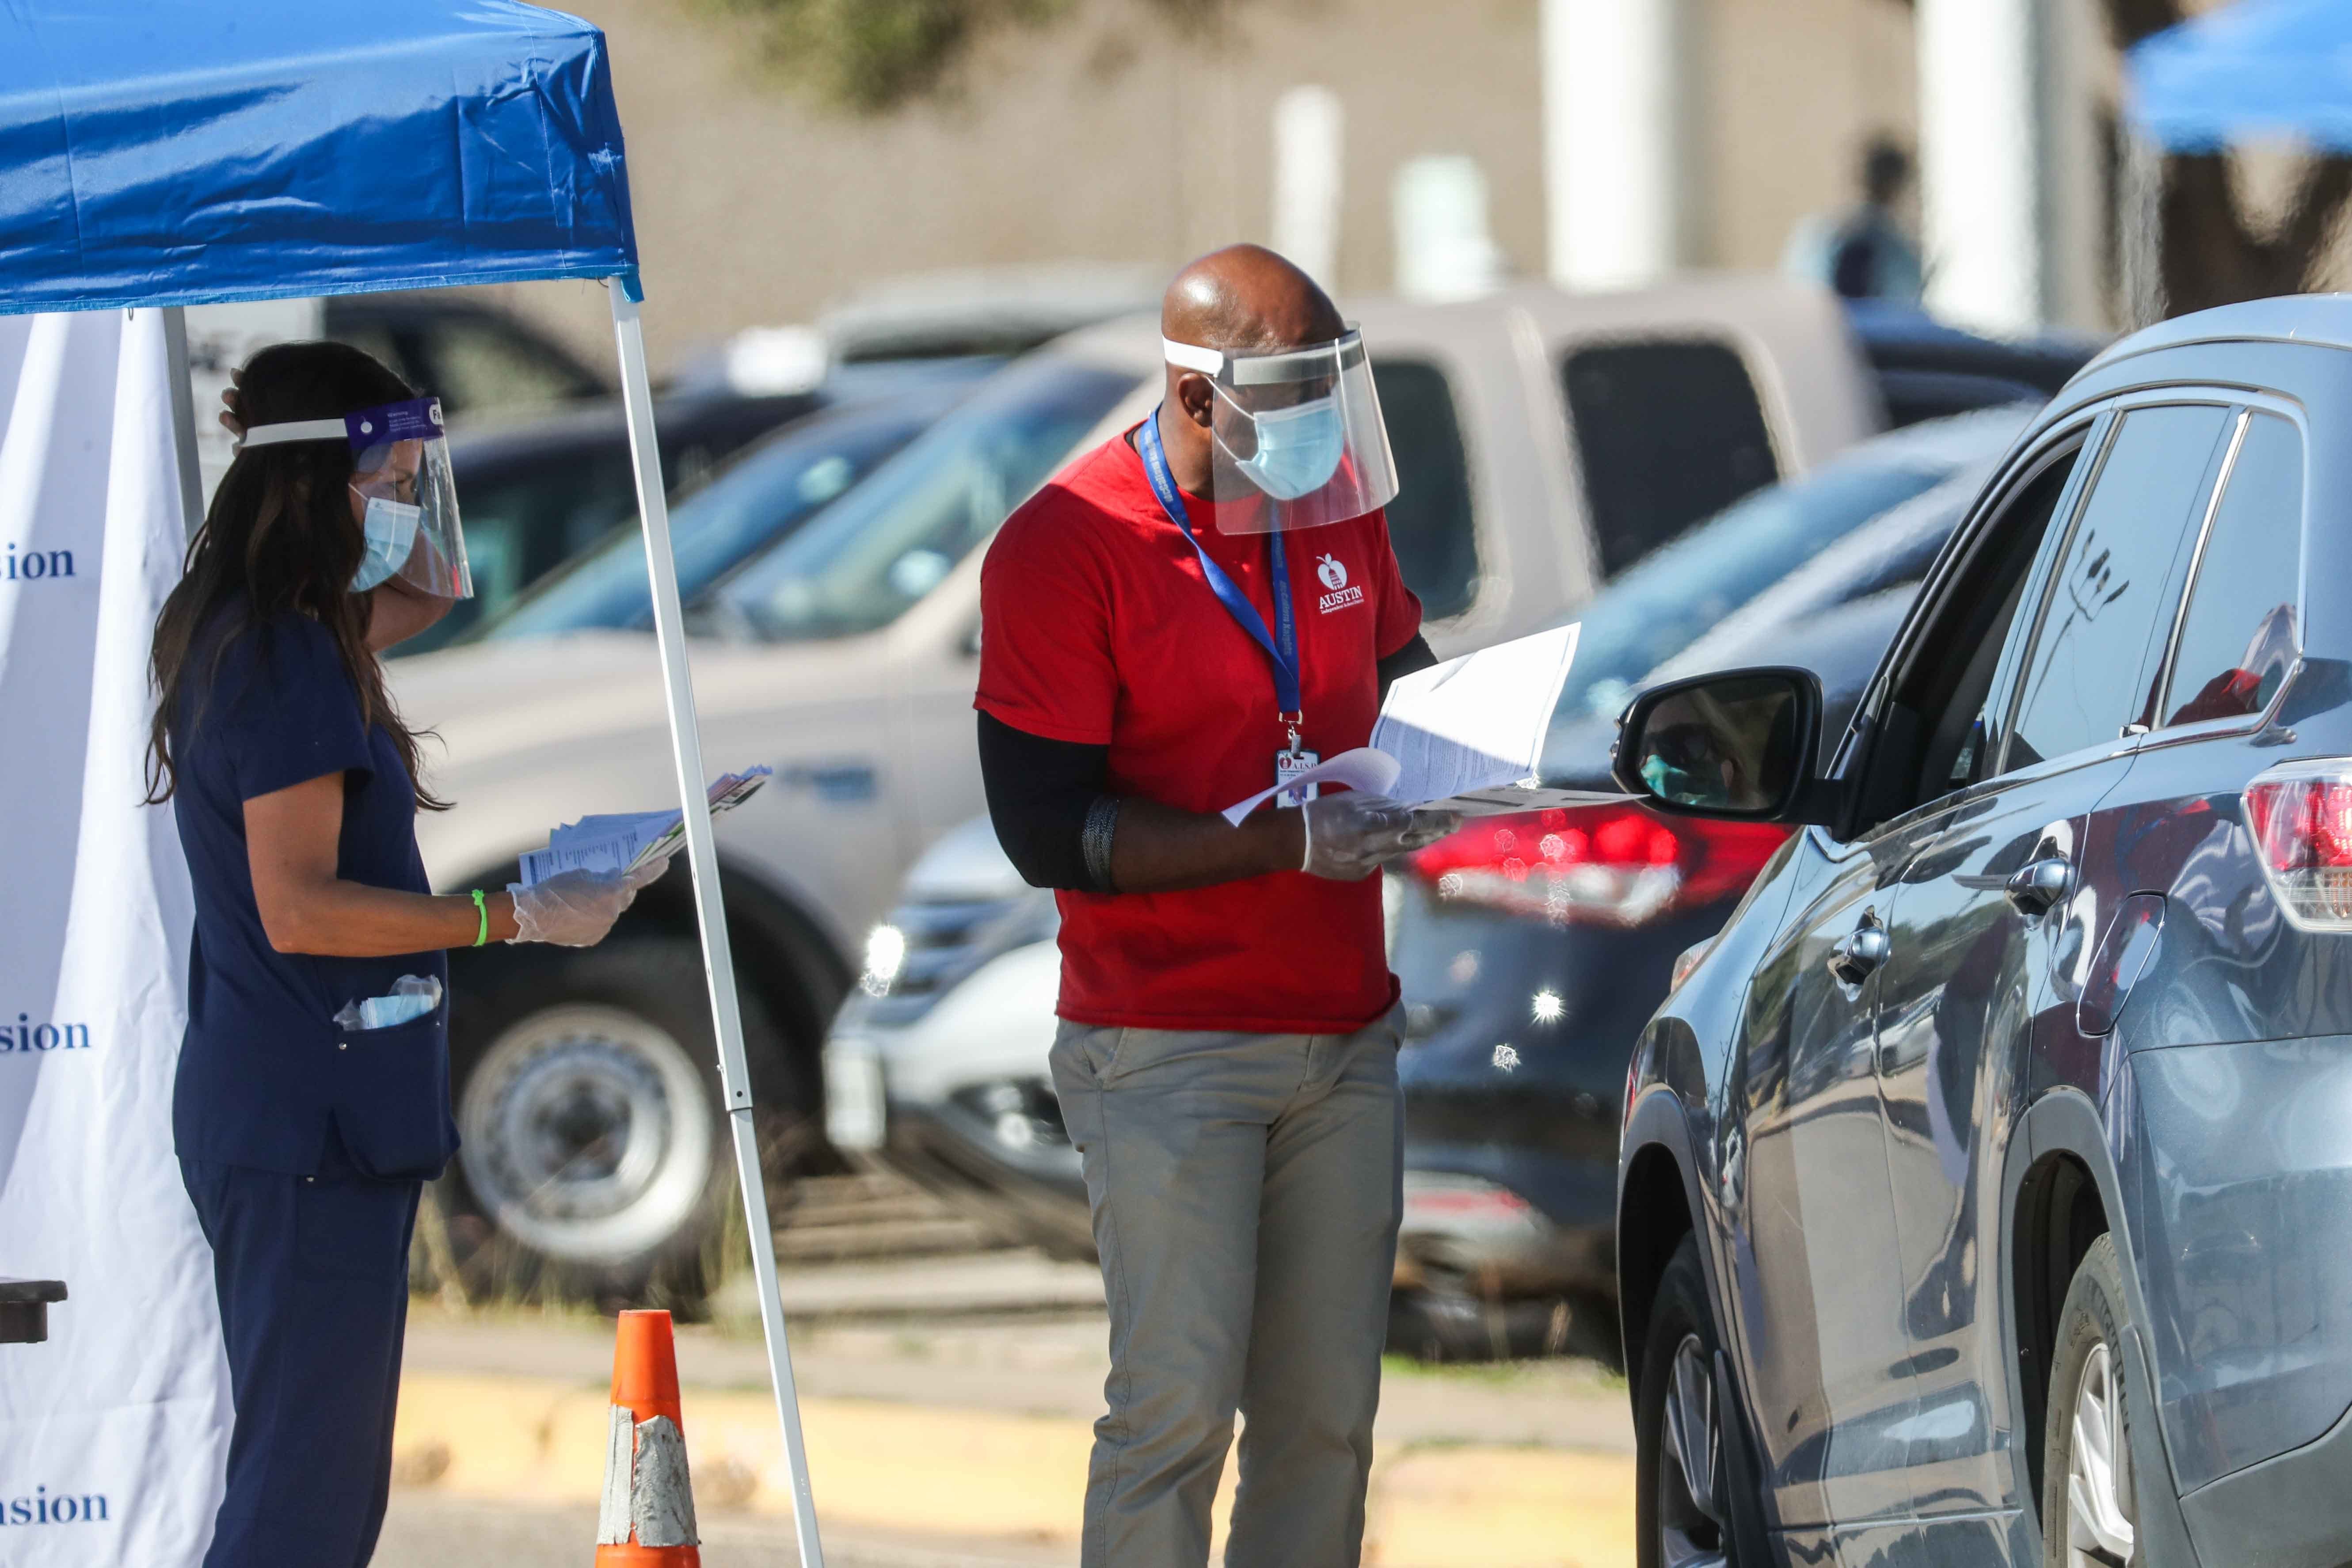 Austin Independent School District staff instruct an attendant where to go to take a COVID-19 tests for staff and students who attend in person classes at the Austin High School after the outbreak in cases at this site in Austin, on Monday, November 16, 2020.